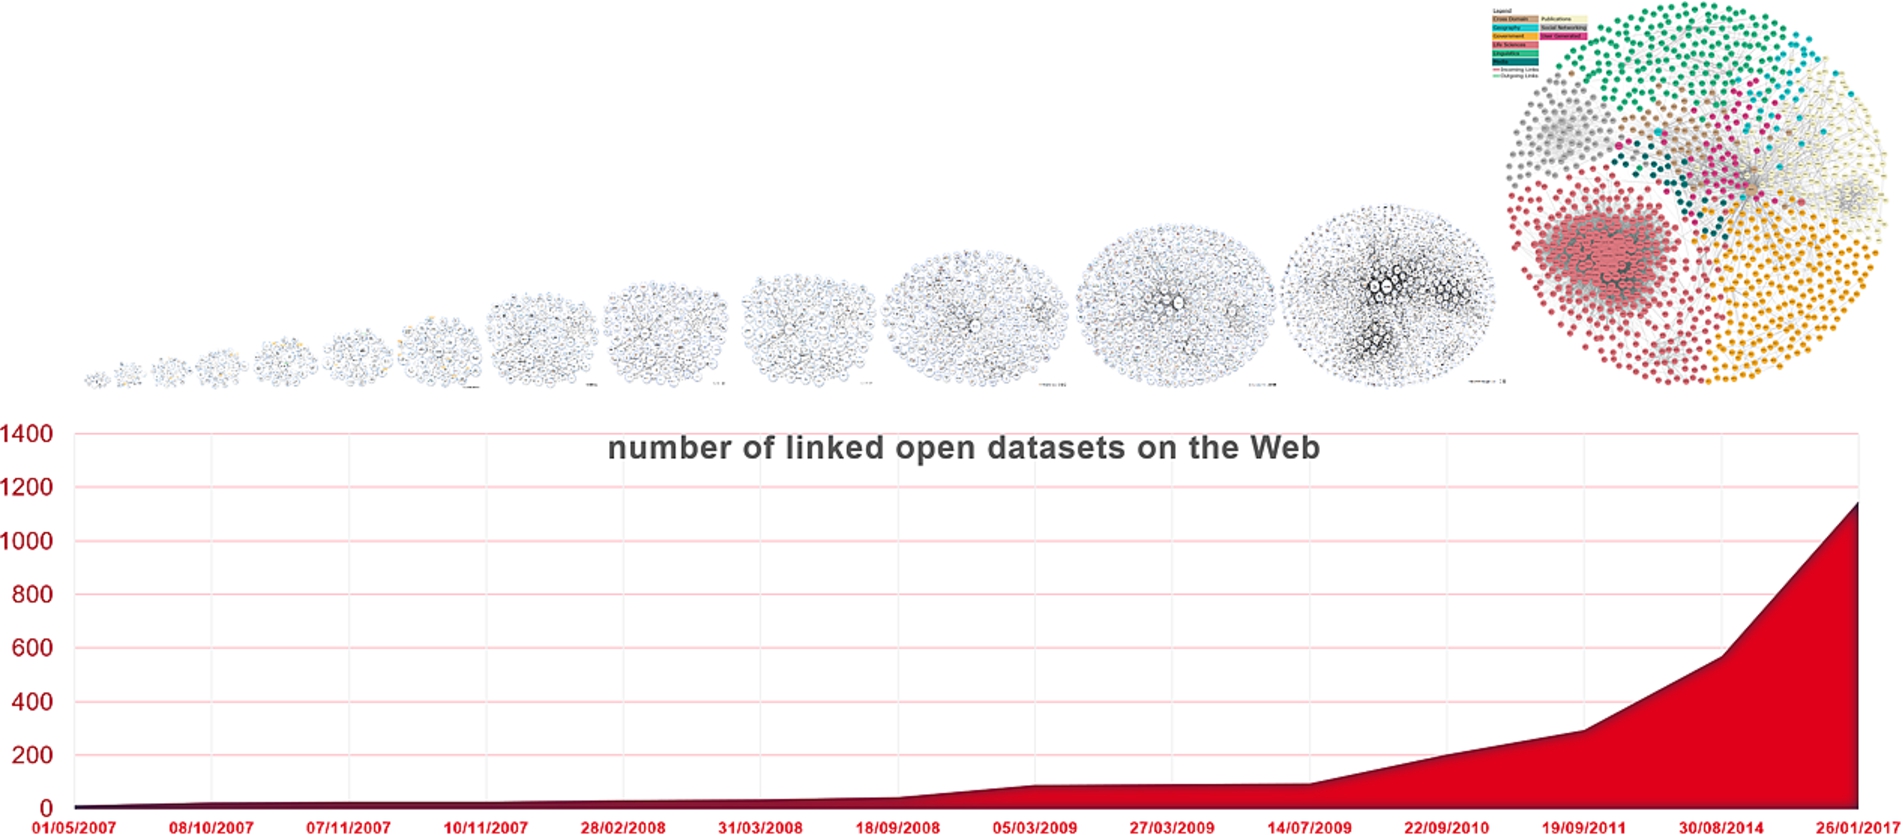 Number of linked open datasets on the Web plotted from 2007 to 2017 with data from [13] and [16].